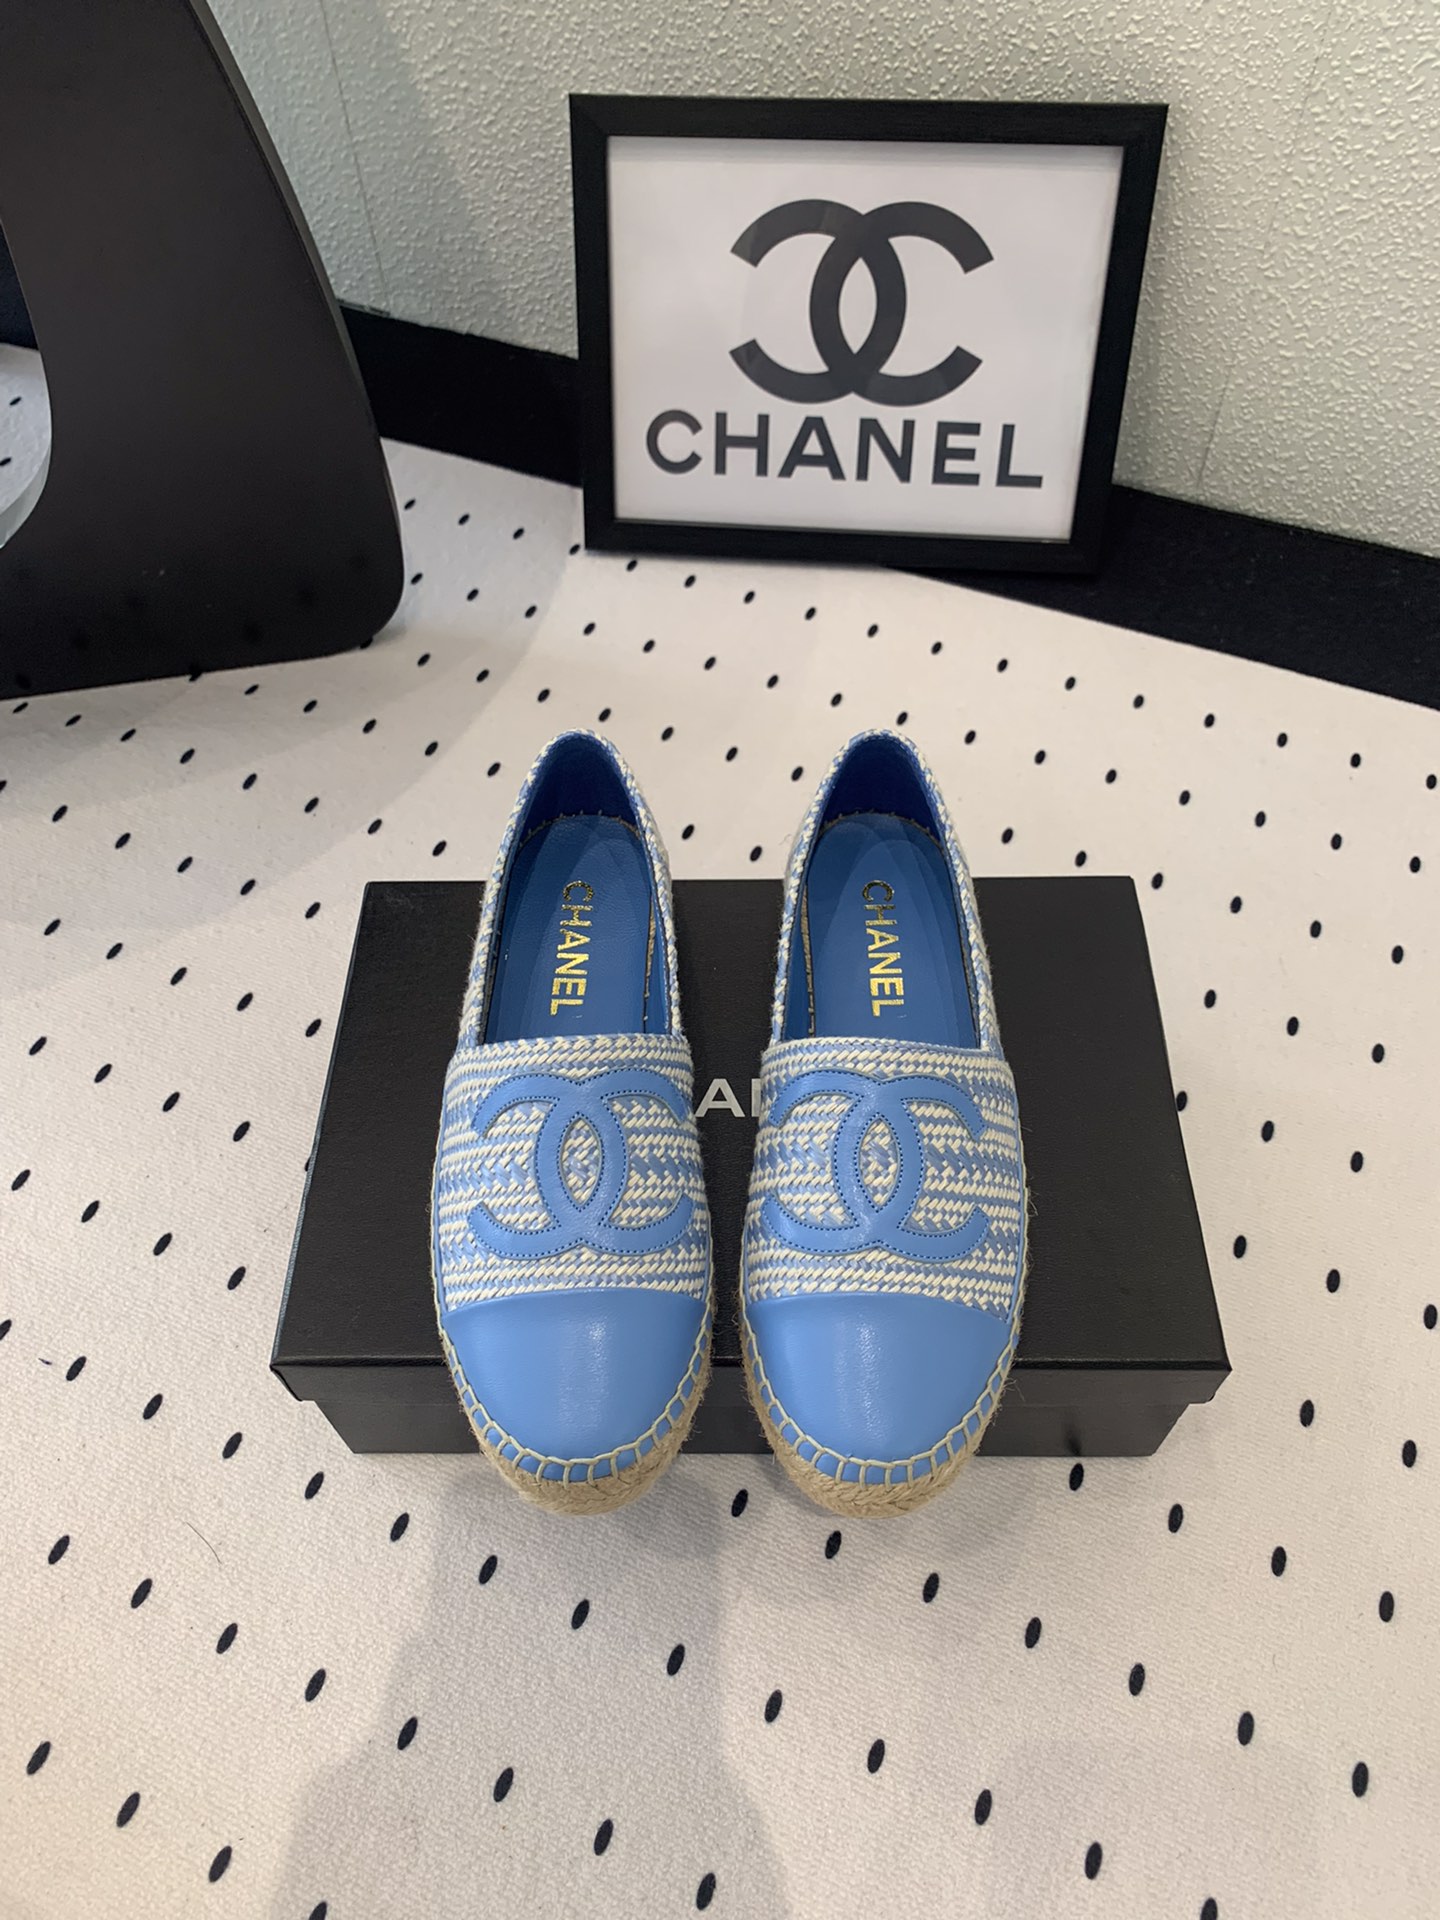 Chanel Shoes Espadrilles Shop the Best High Authentic Quality Replica
 Weave Hemp Rope Sheepskin Summer Collection Fashion Casual